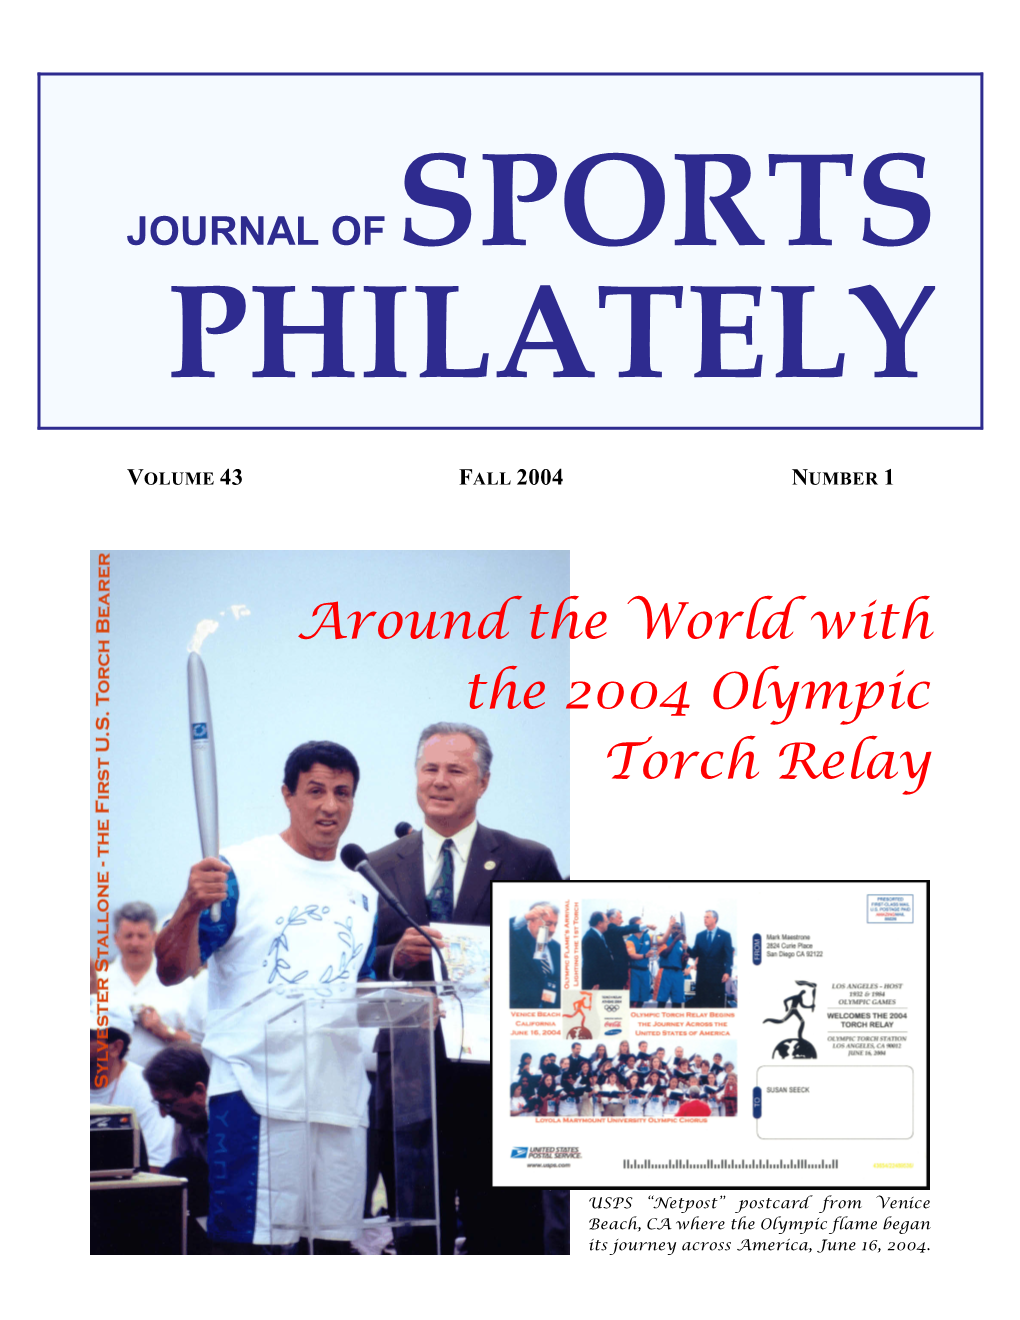 Around the World with the 2004 Olympic Torch Relay